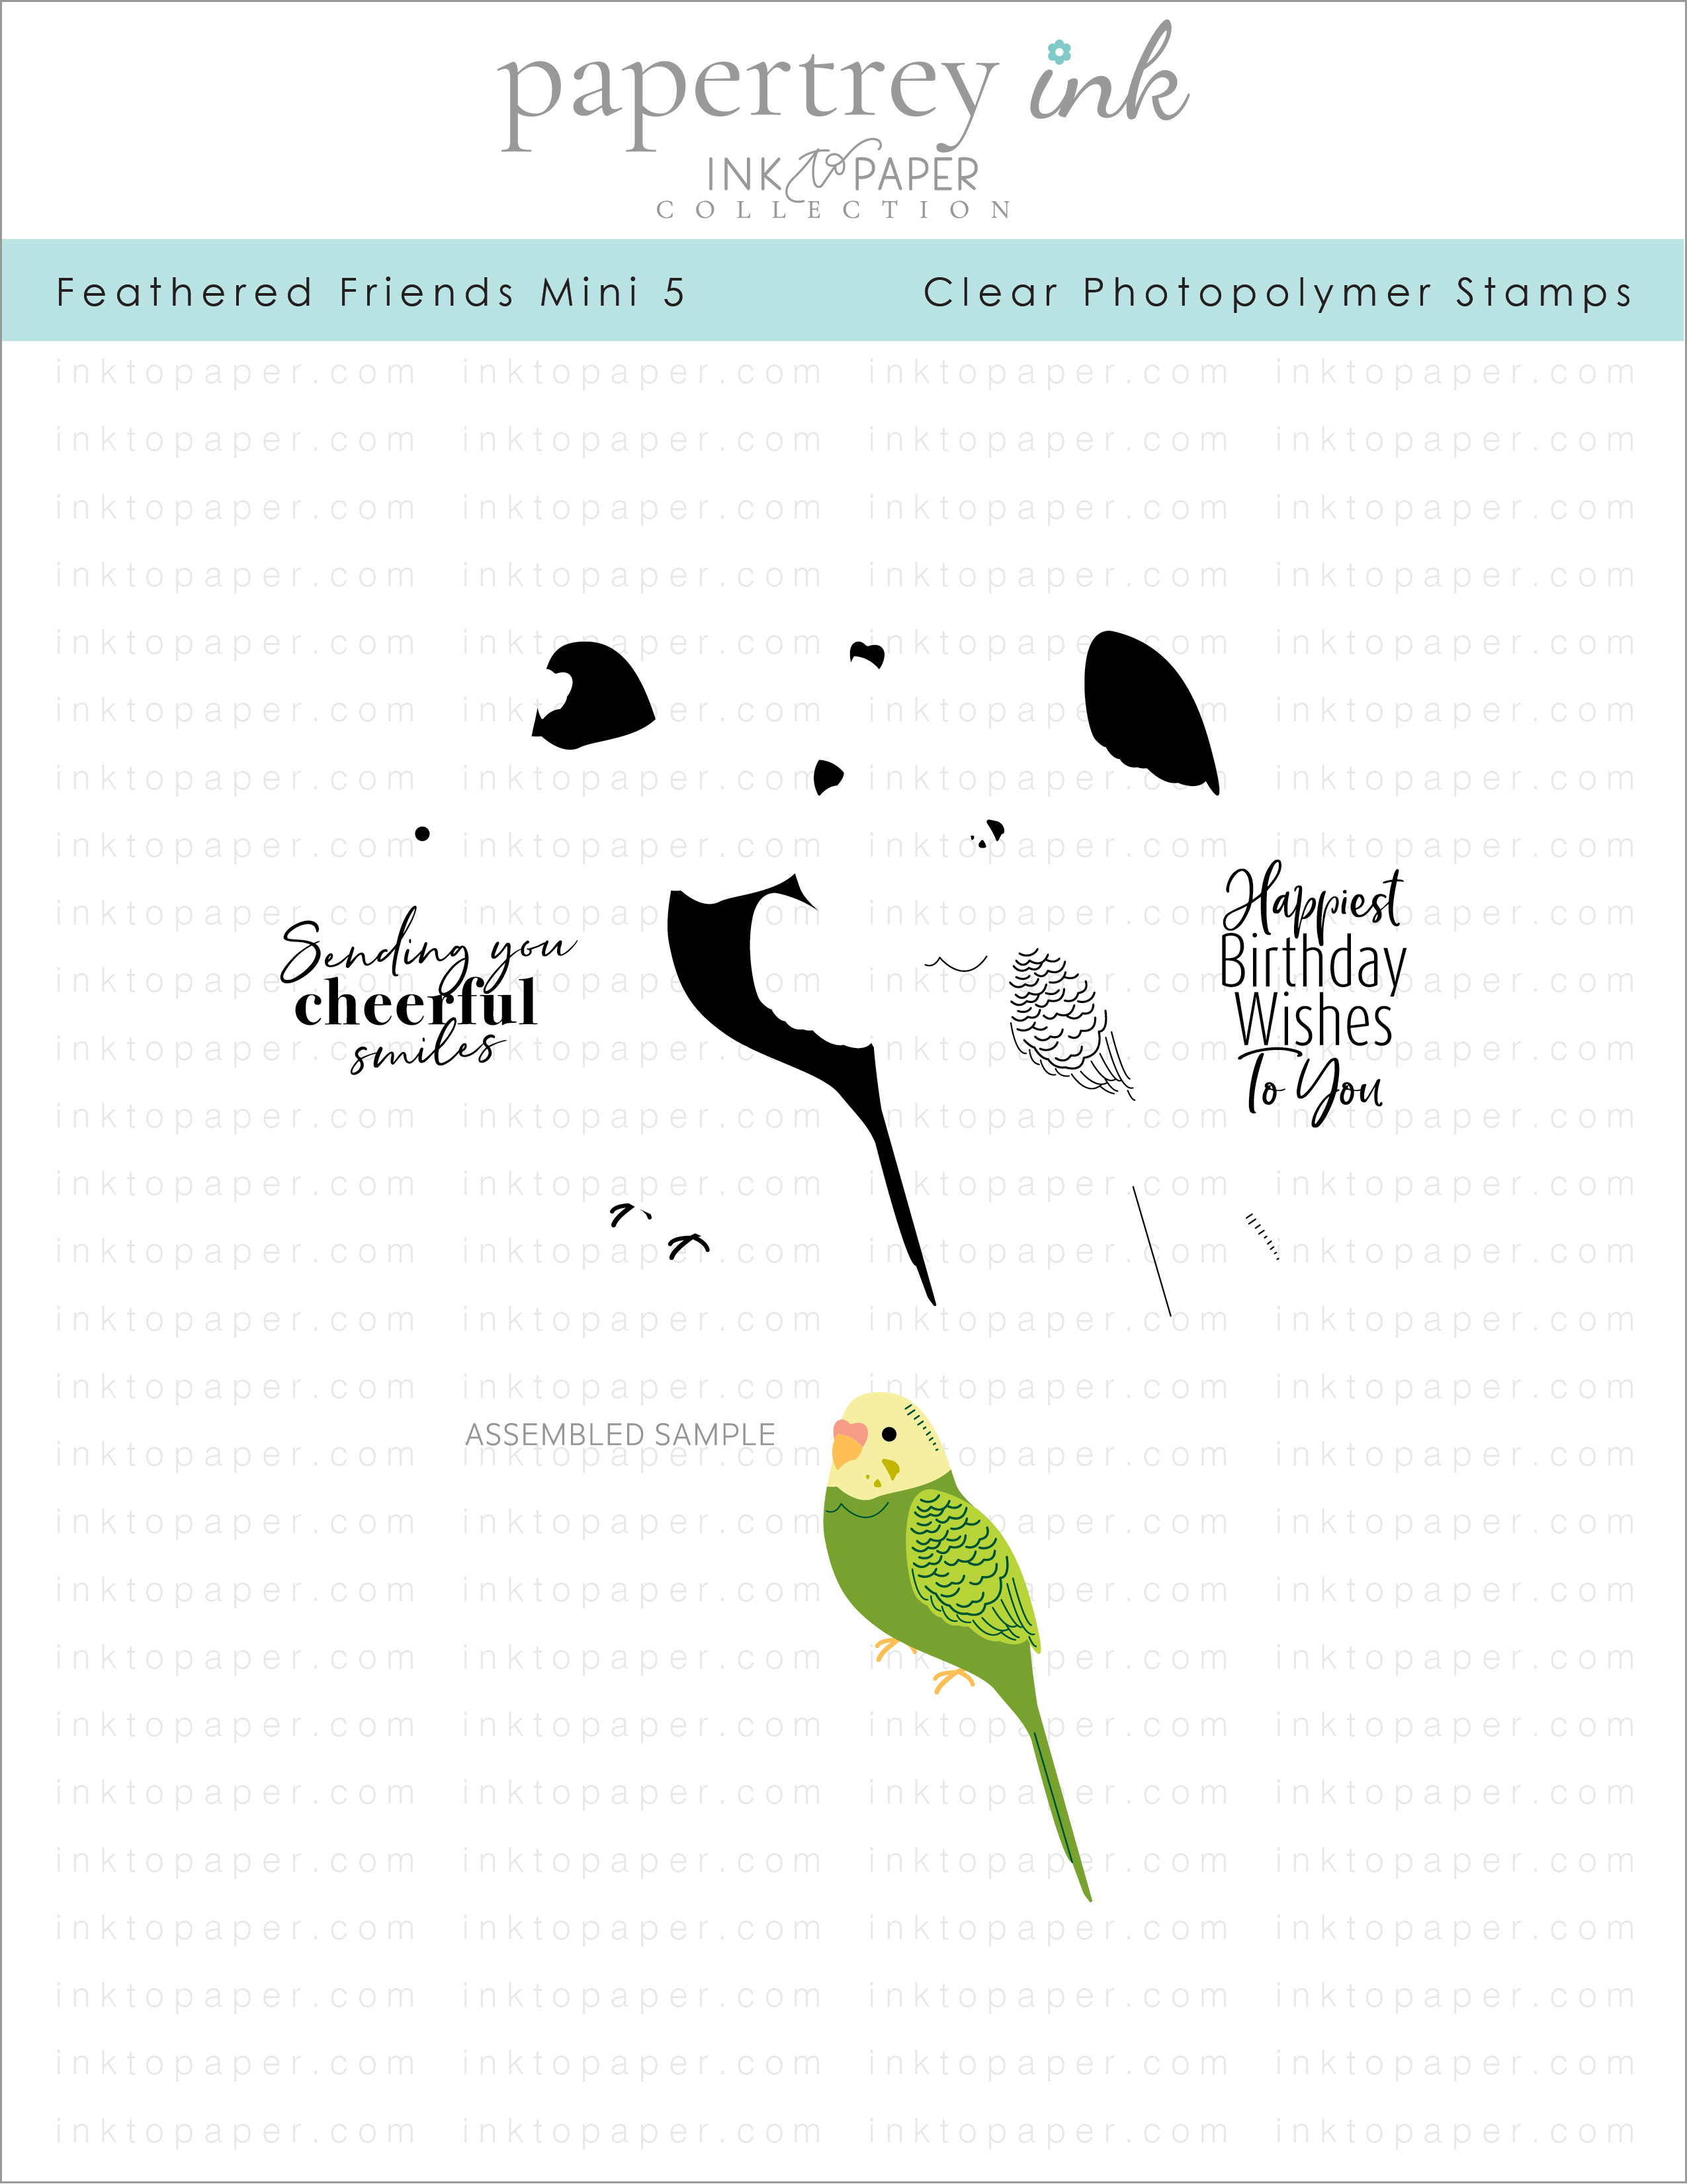 Feathered Friends Mini 5 Mini Stamp Set: Papertrey Ink